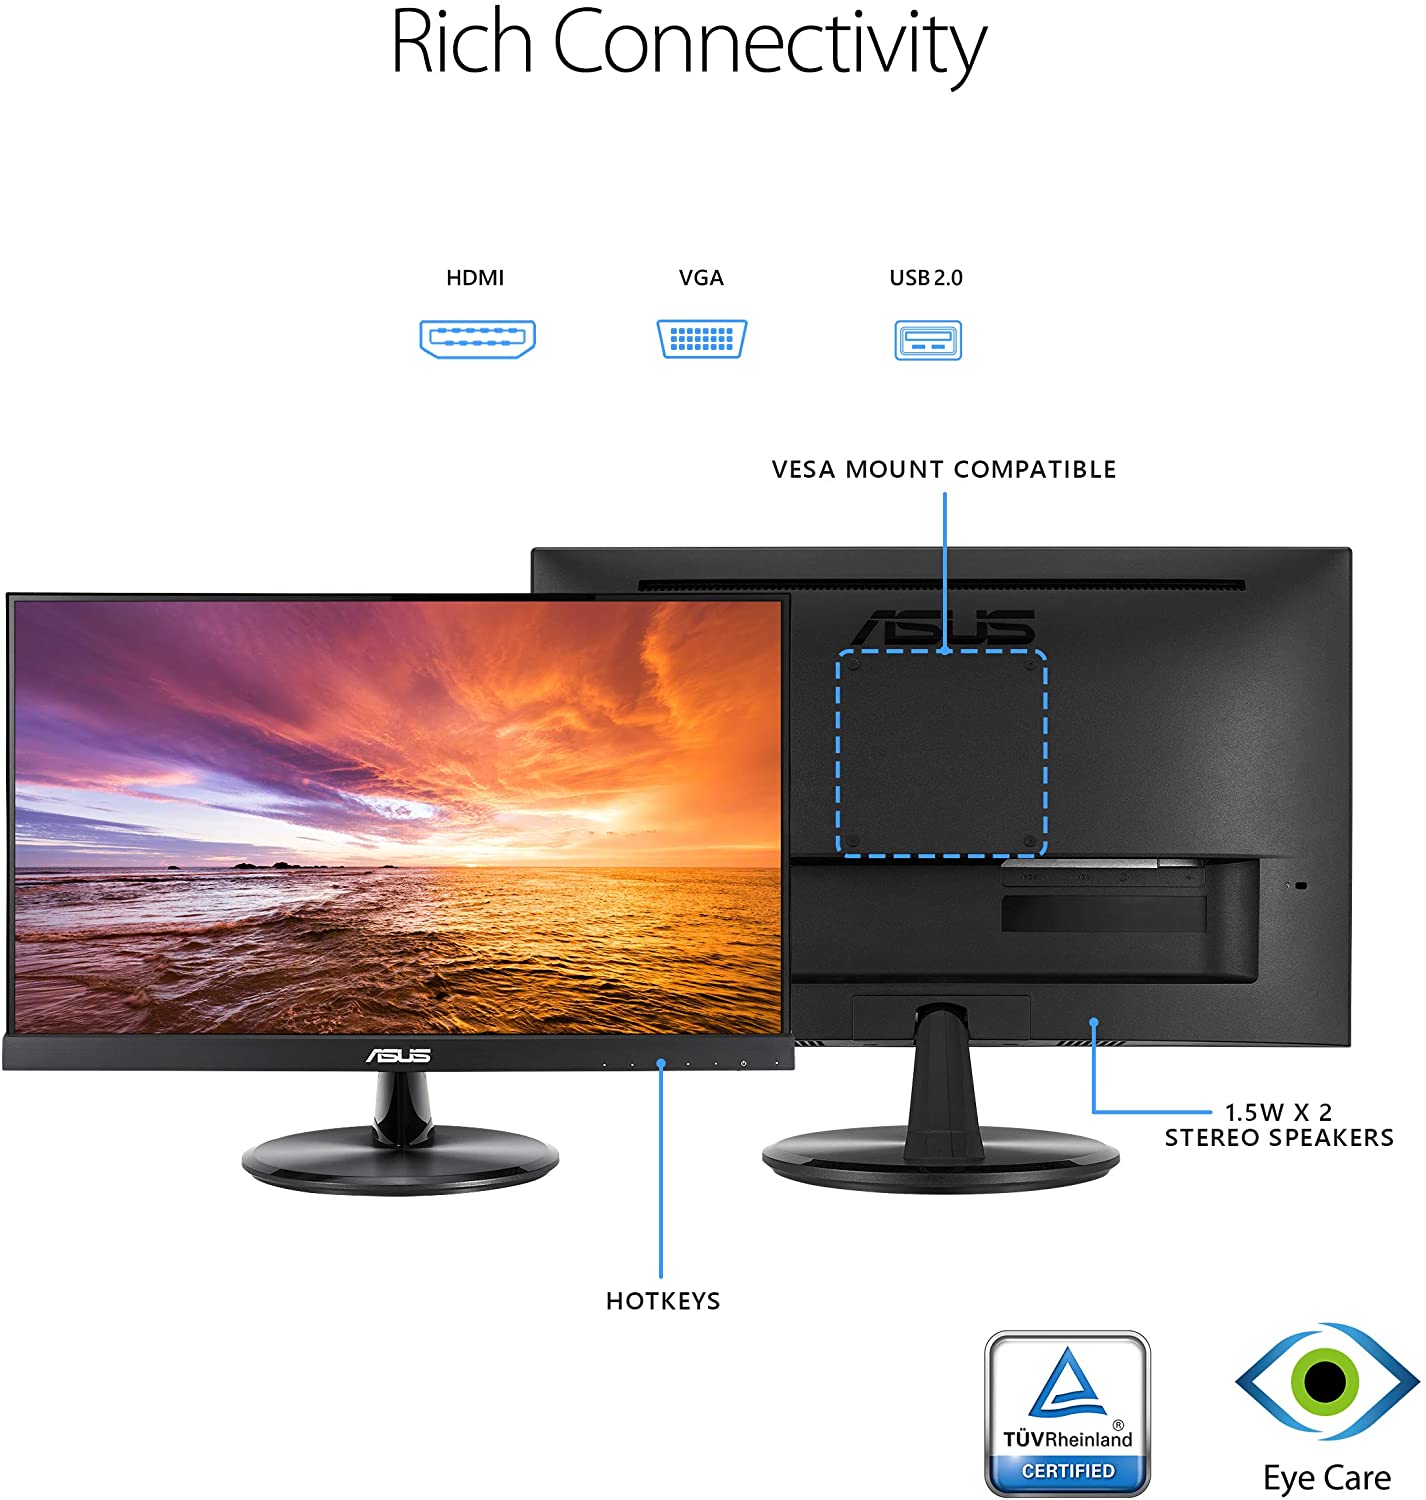 ASUS VT229H 21.5 FHD IPS (1920x1080) TOUCH MONITOR - 90LM0490-B0..